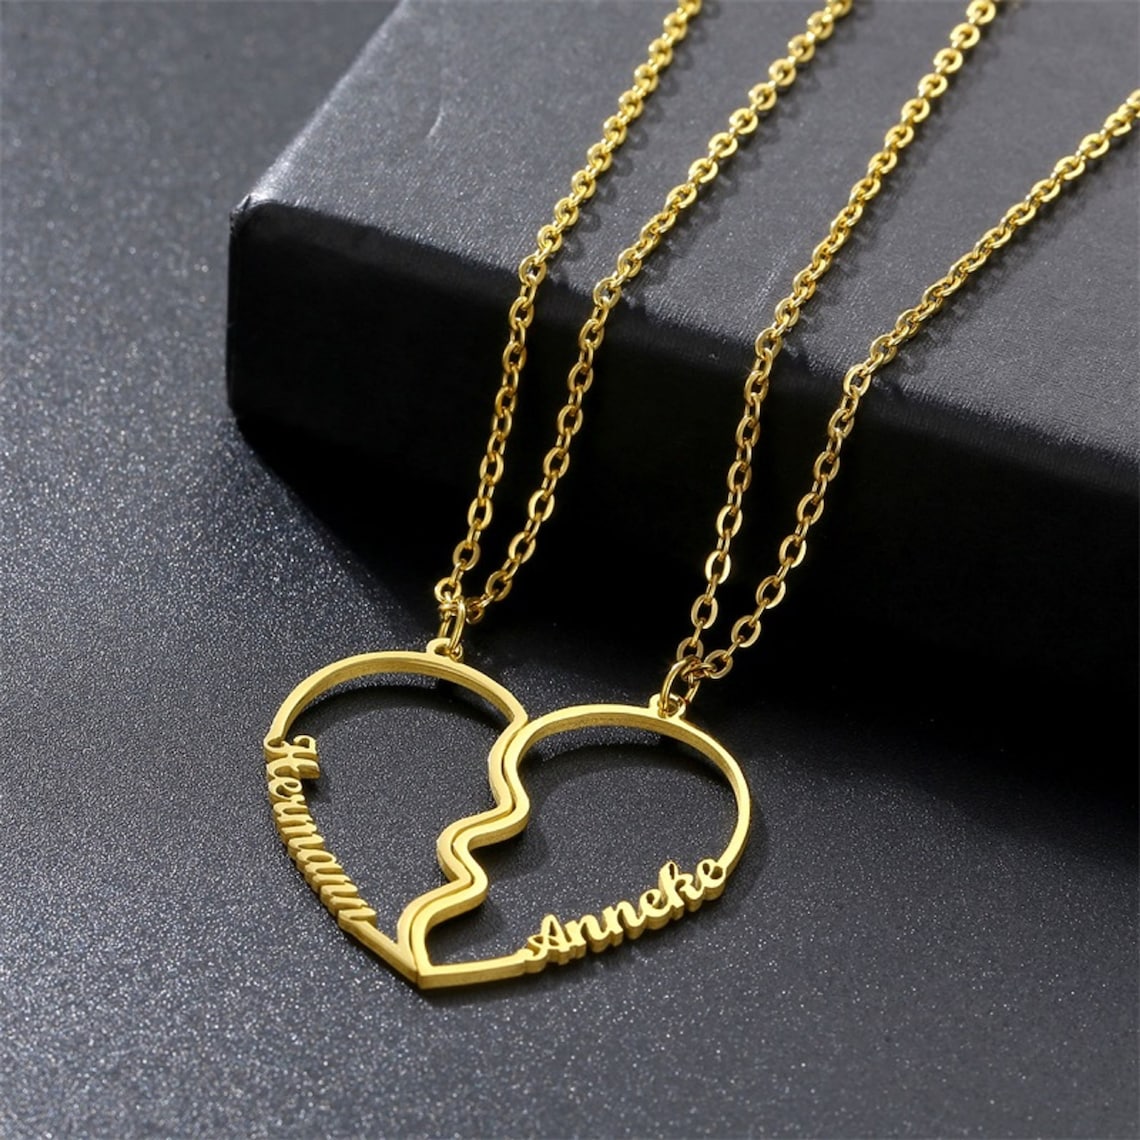 Heart Pendant Chain | Heart Shaped Silver Necklace for Women